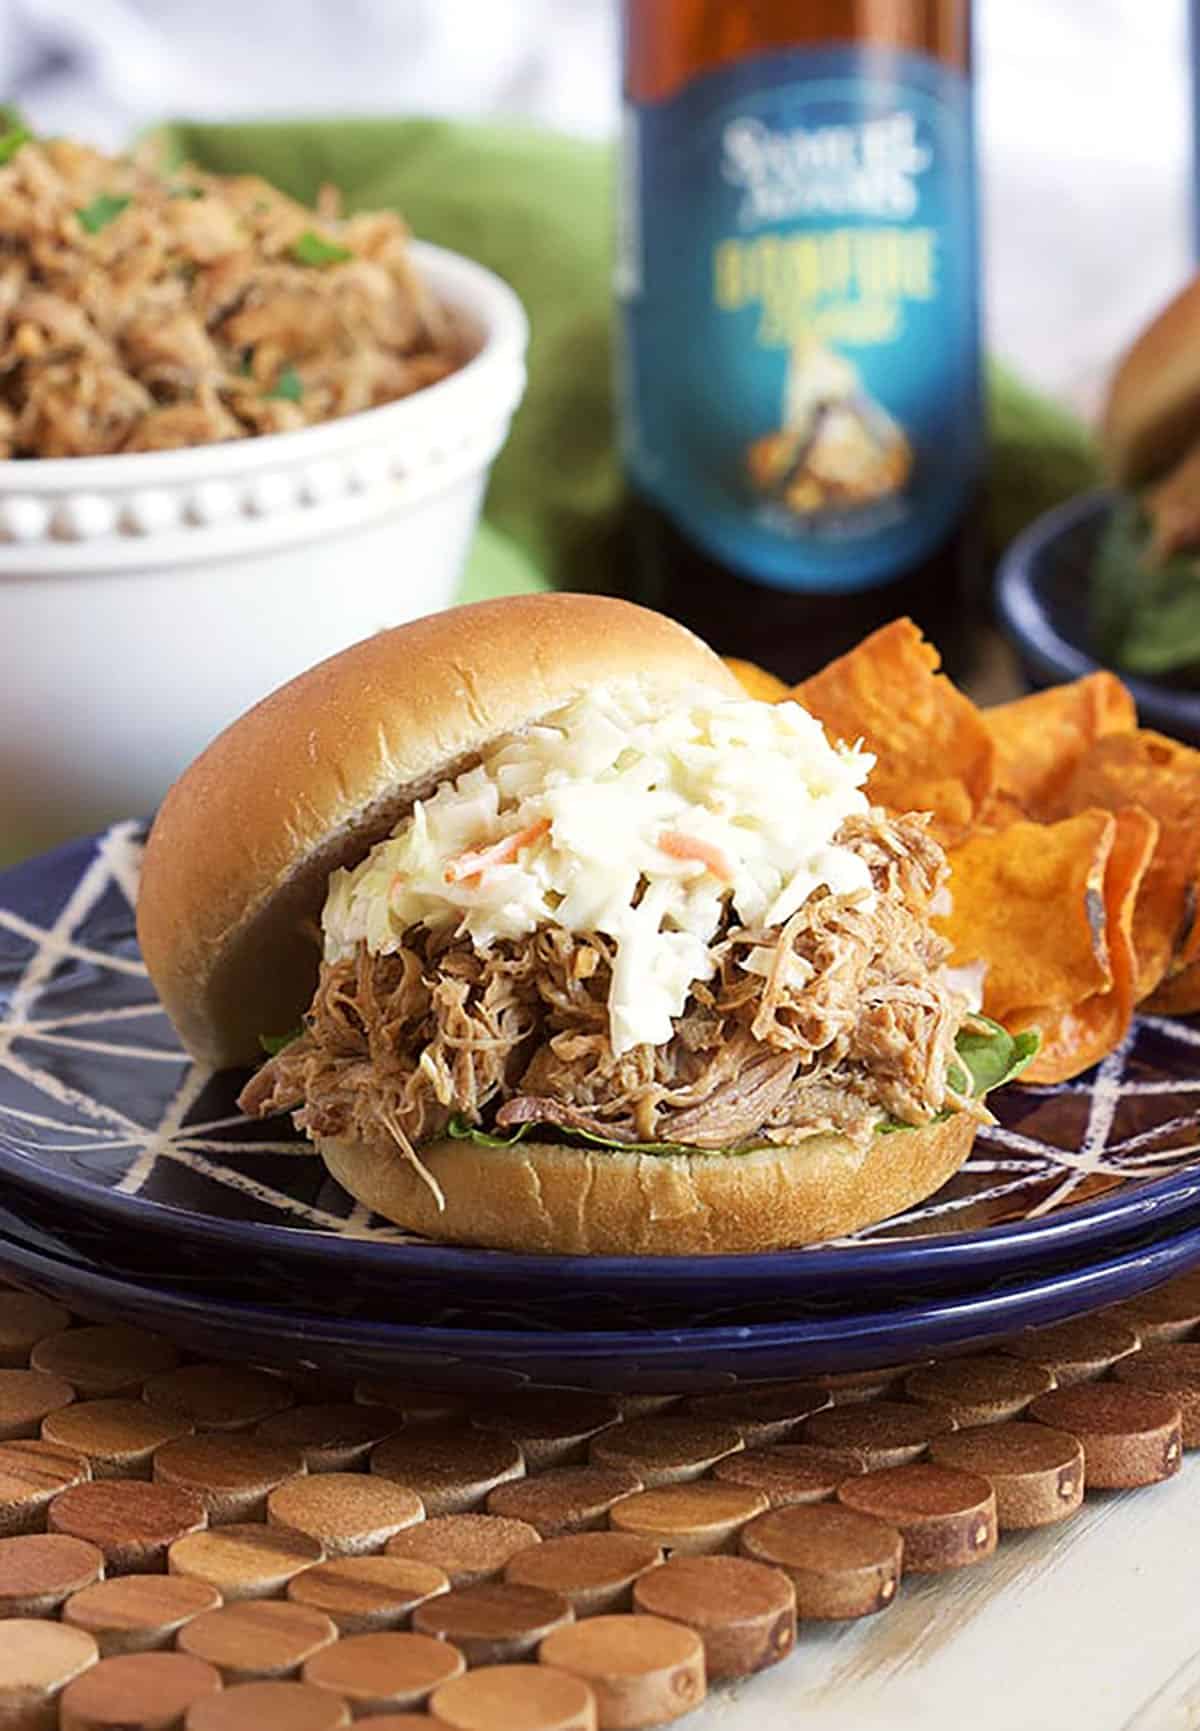 Slow cooker pulled pork sandwich with coleslaw on top on a blue plate with sweet potato chips and a bottle of beer in the background.